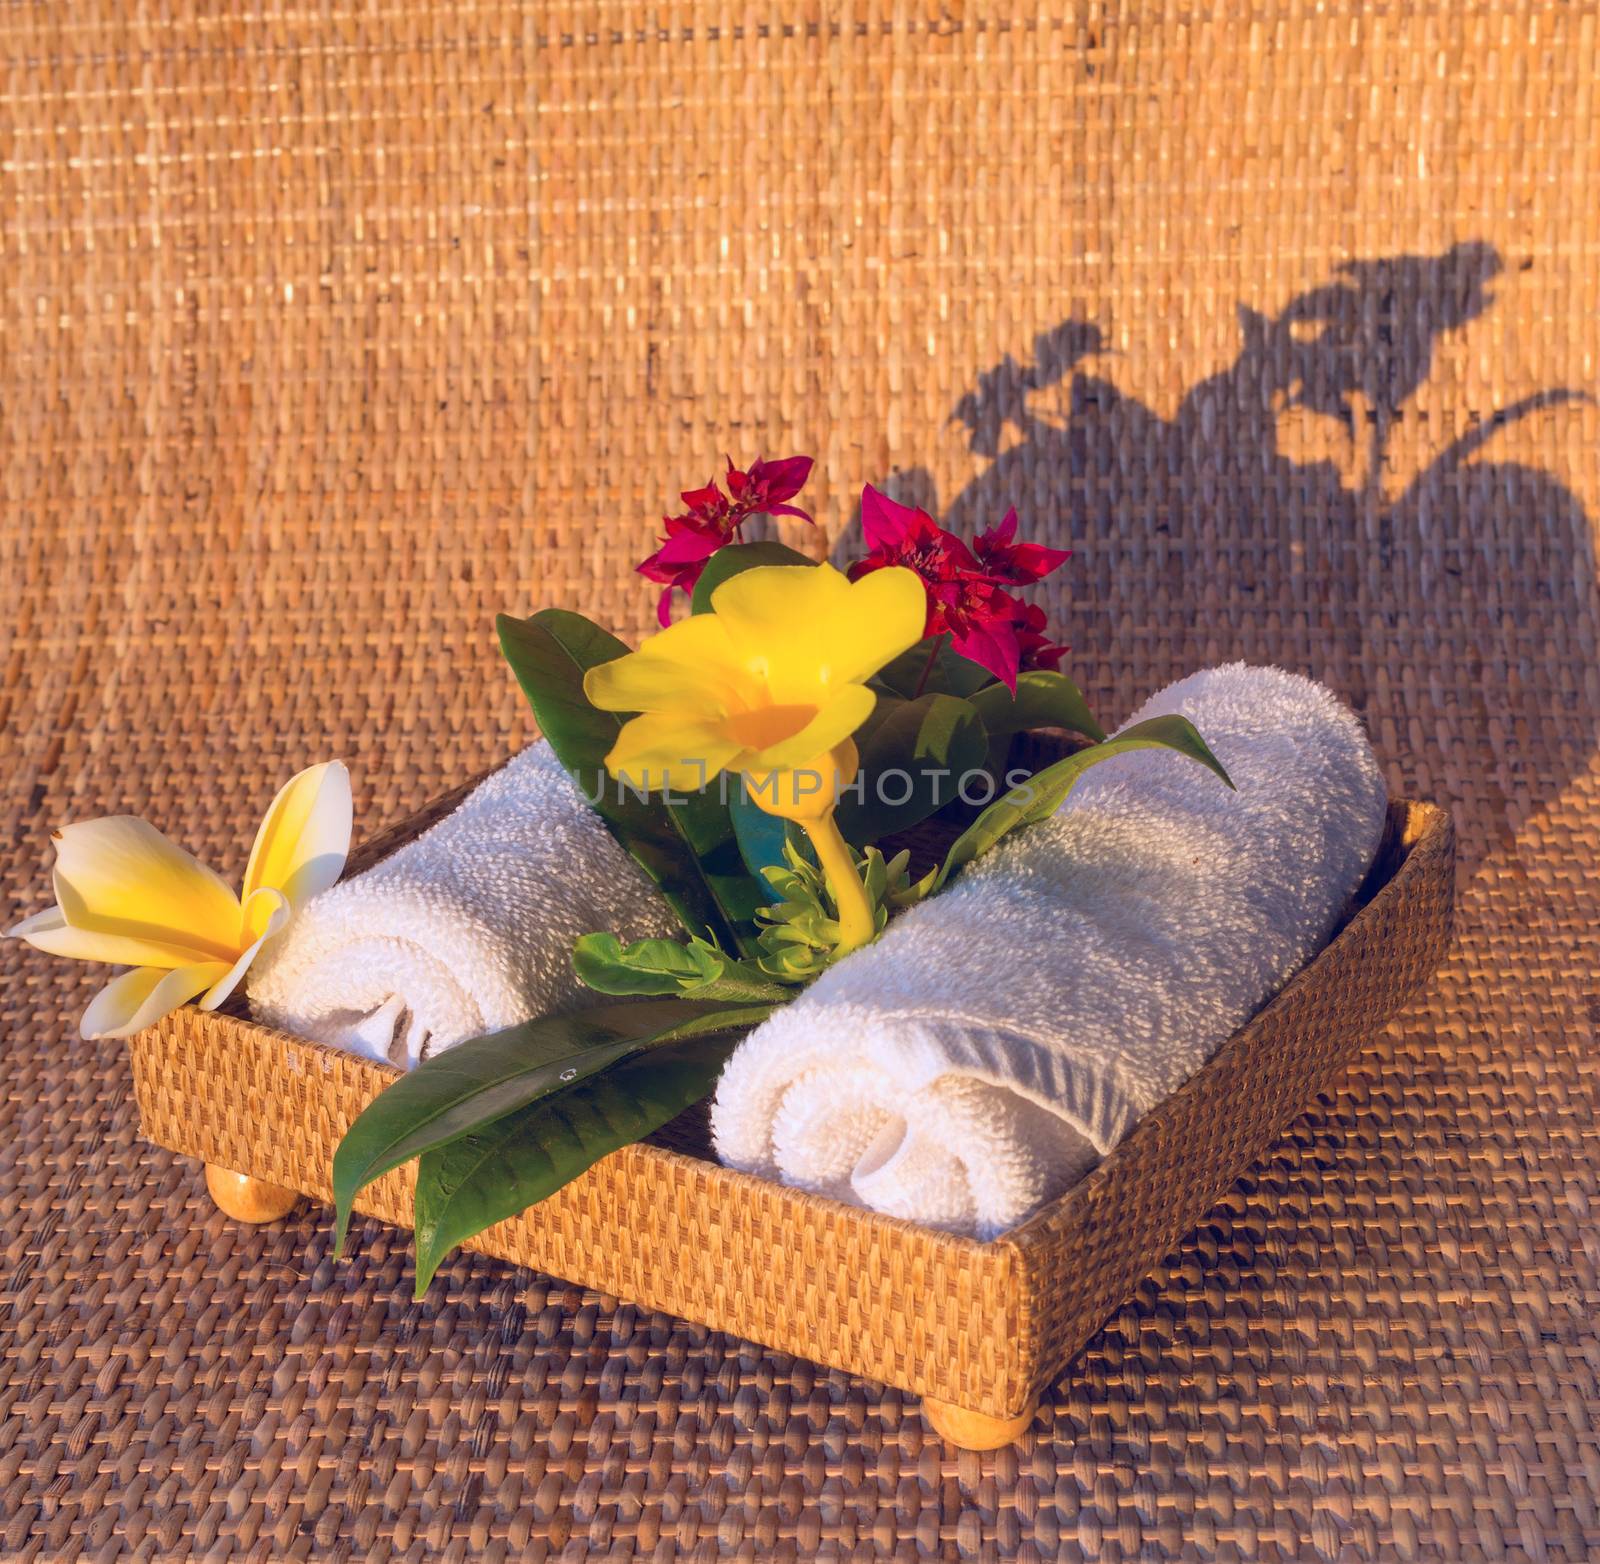 Towels with red yelow and white flowers by BIG_TAU